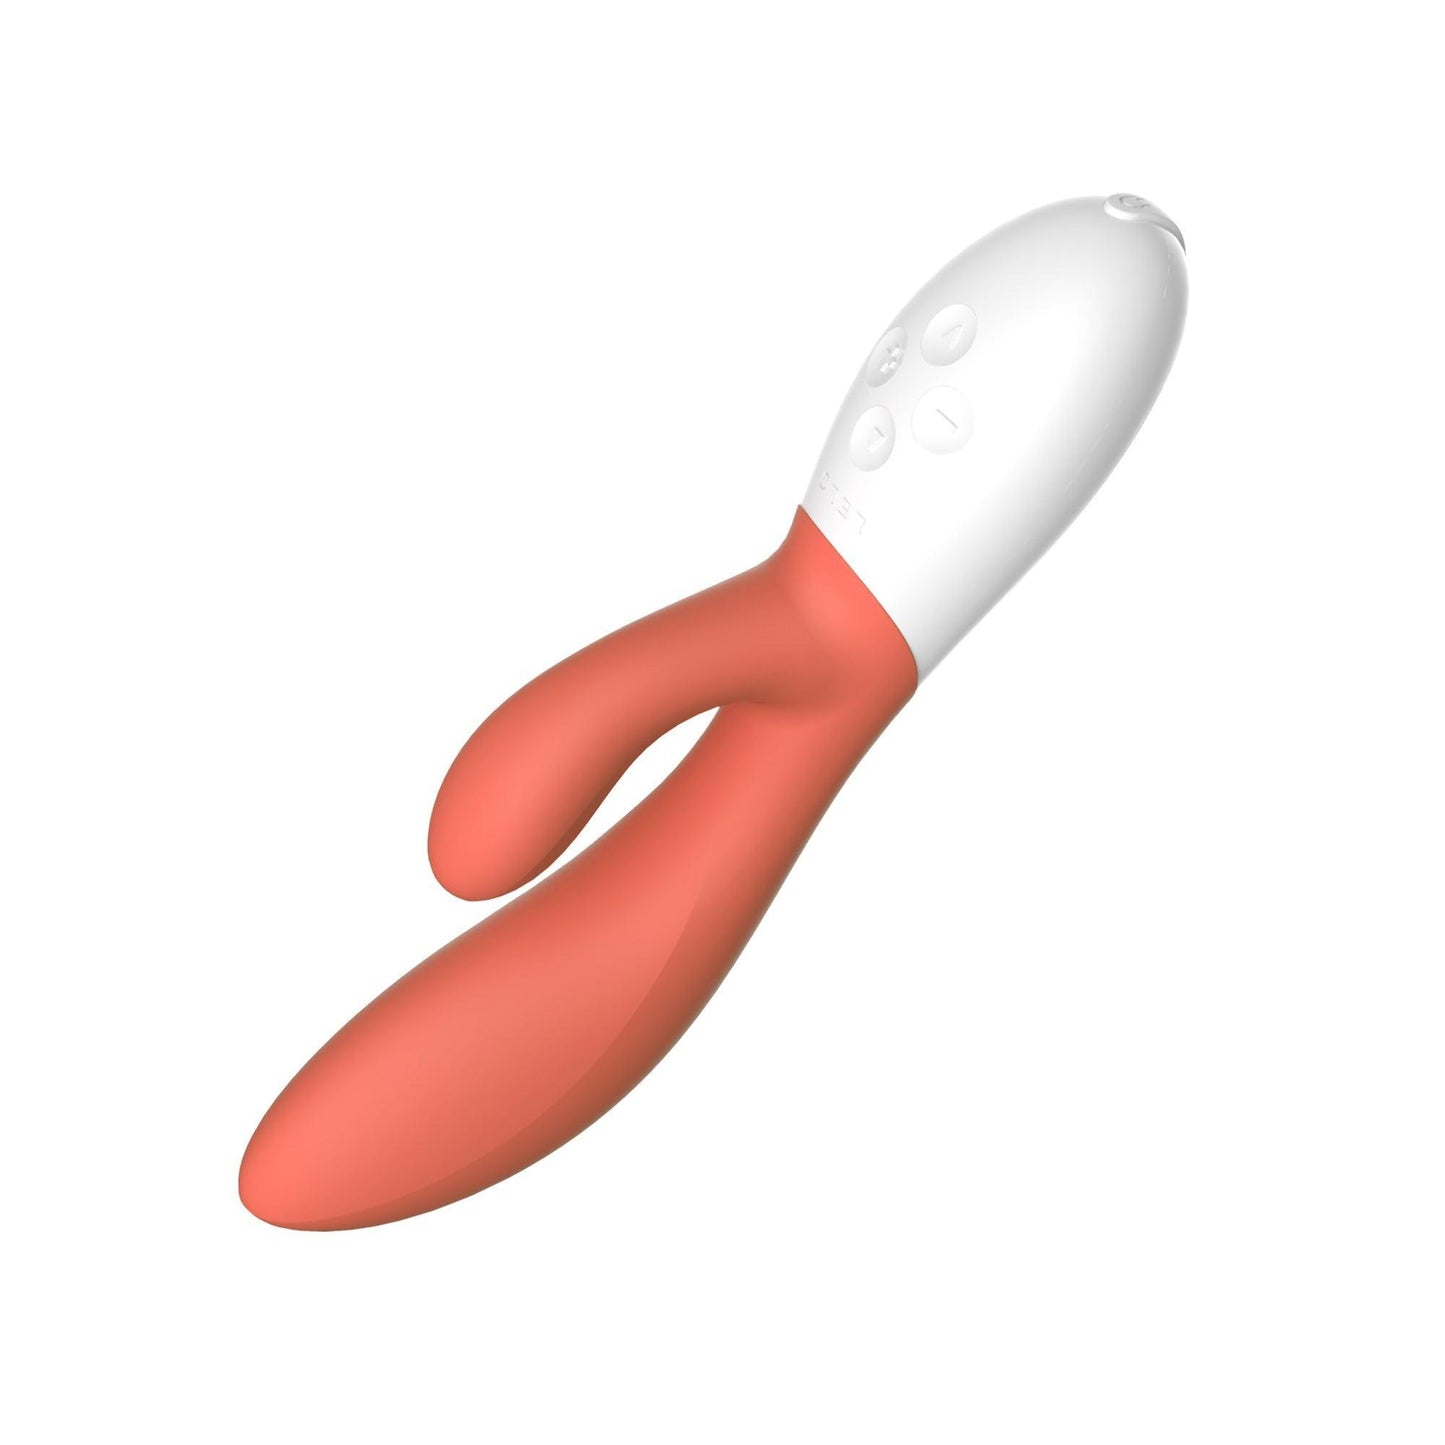 Ina 3 - Coral Red - My Sex Toy Hub